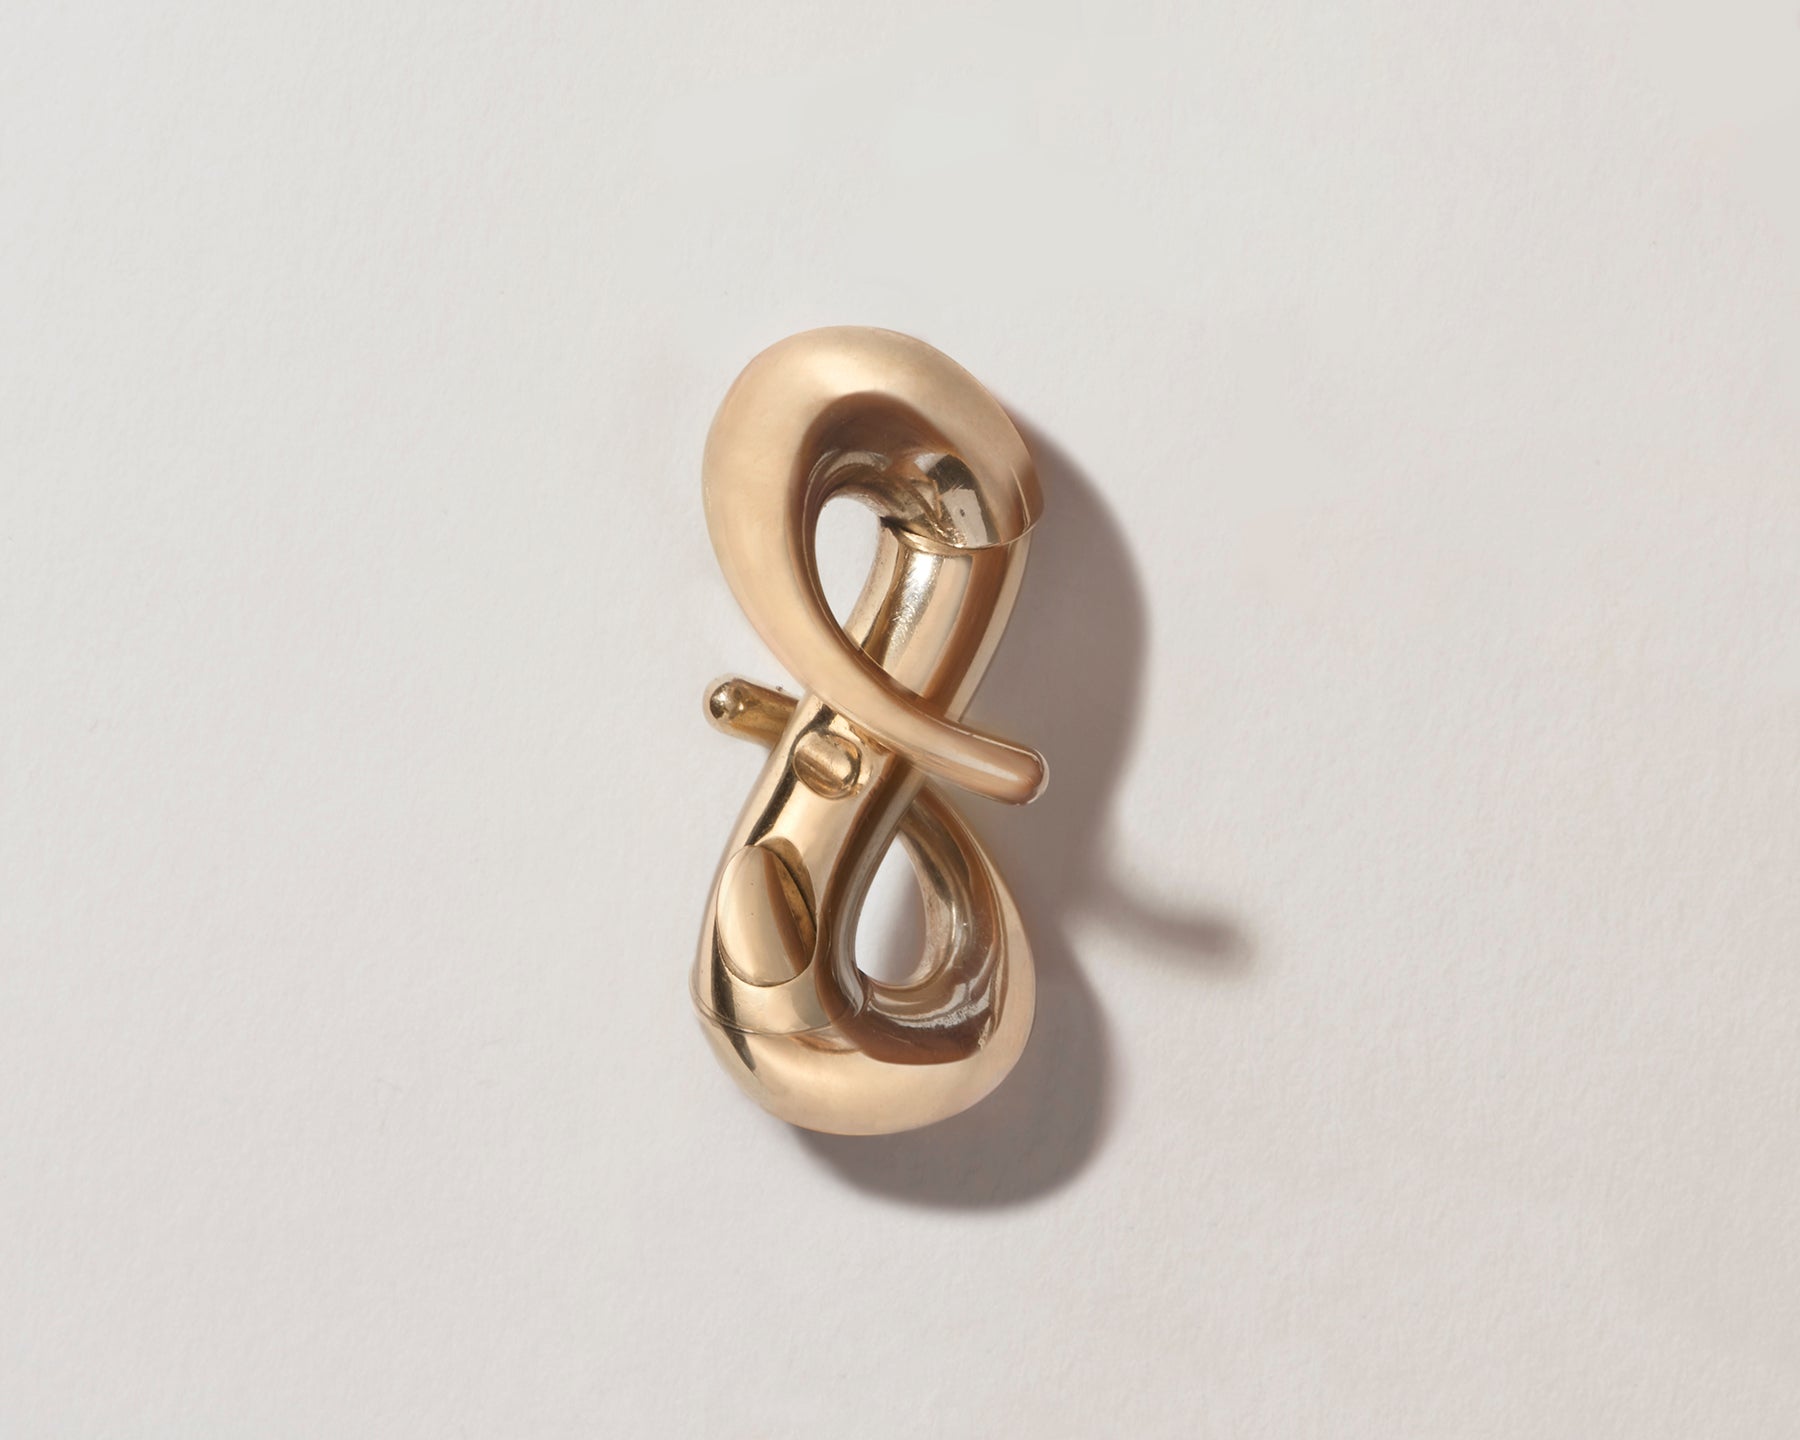 Gold infinity lock with clasp open against gray backdrop